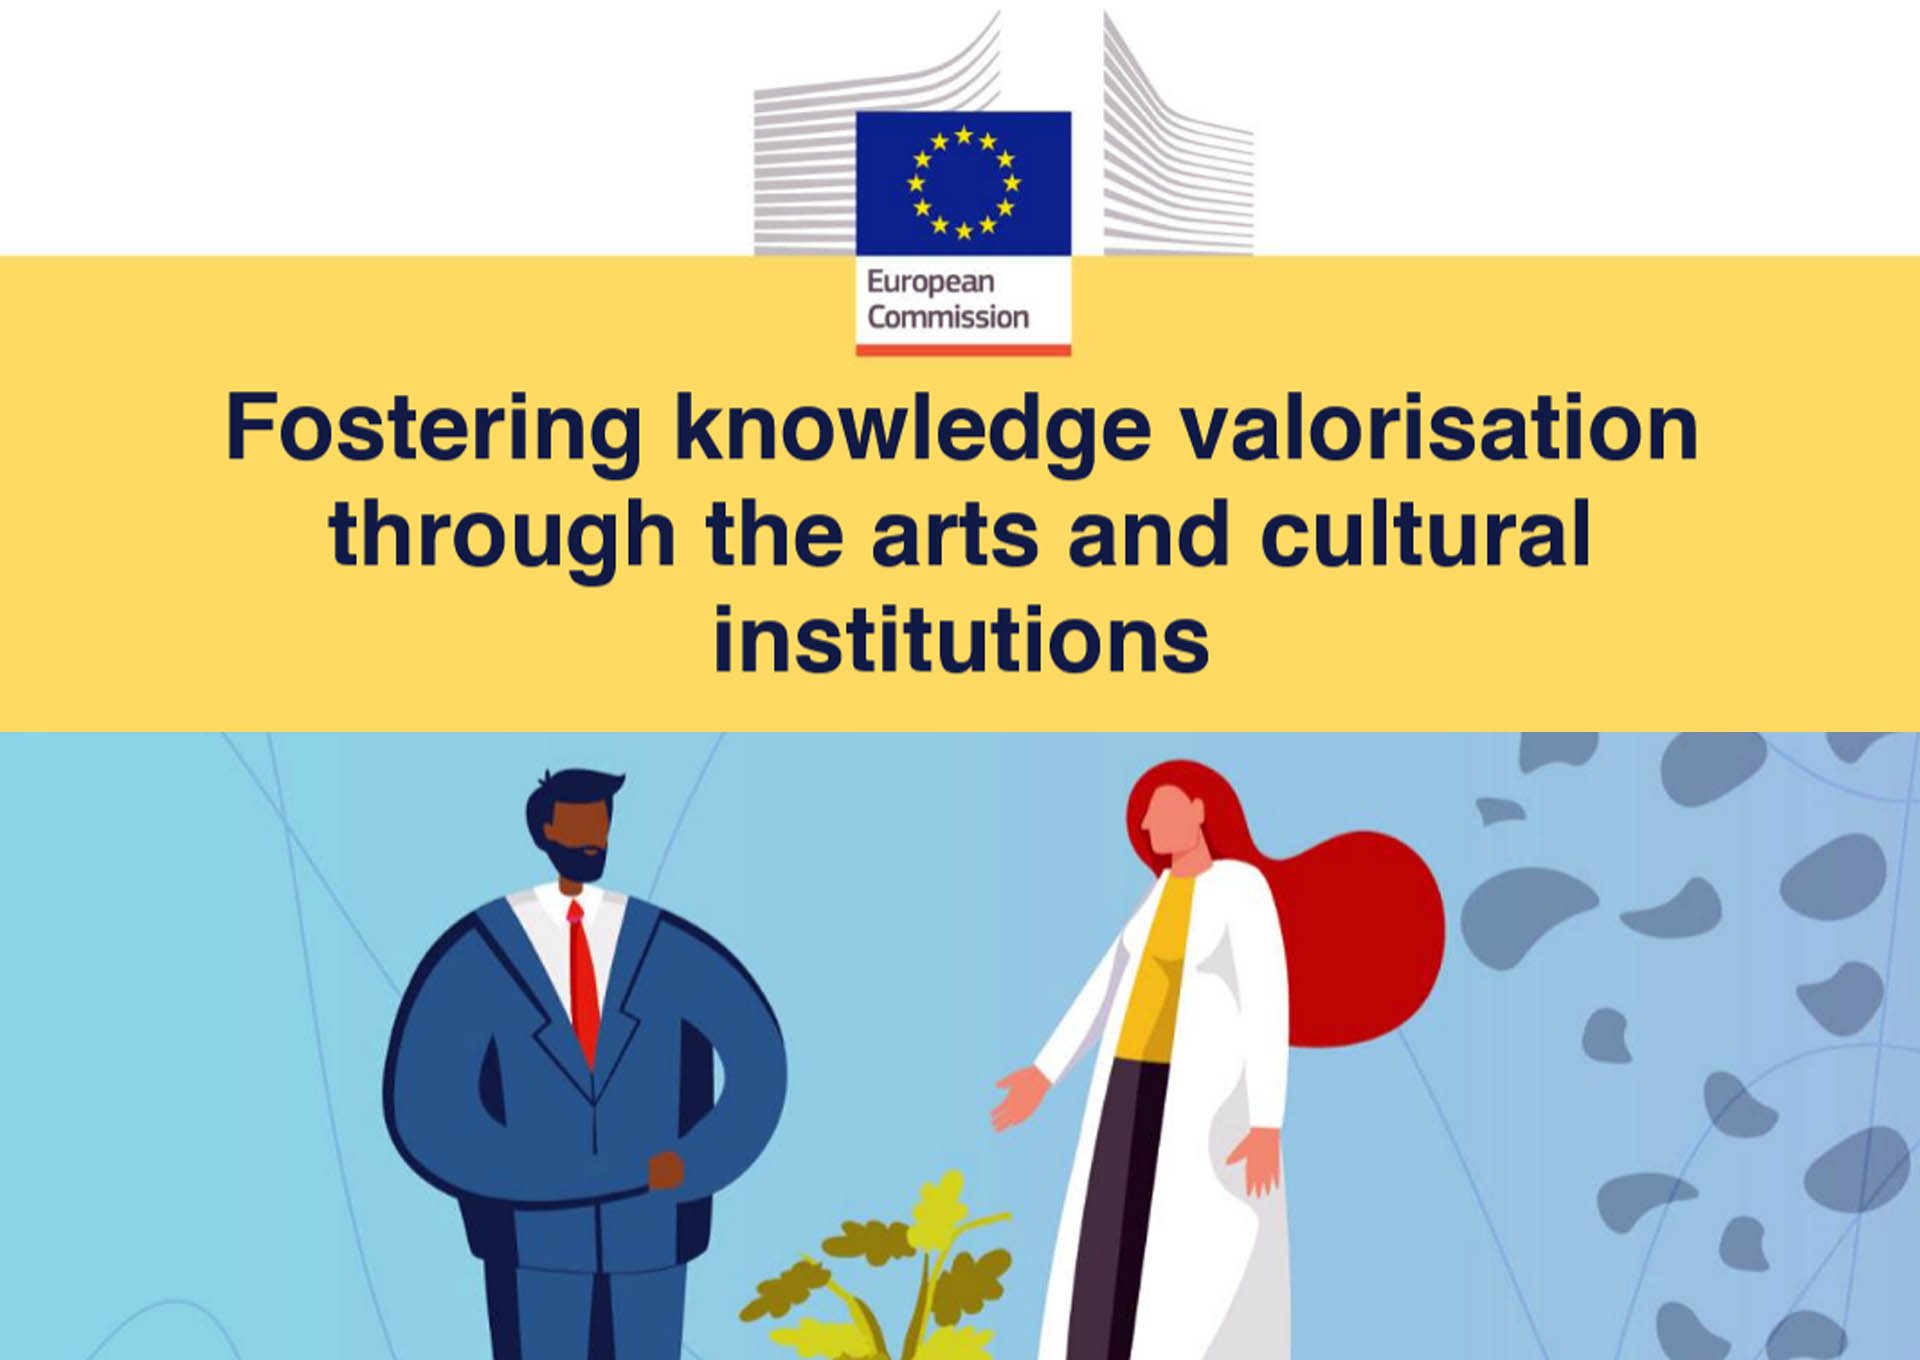 Fostering knowledge valorisation through the arts and cultural institutions study